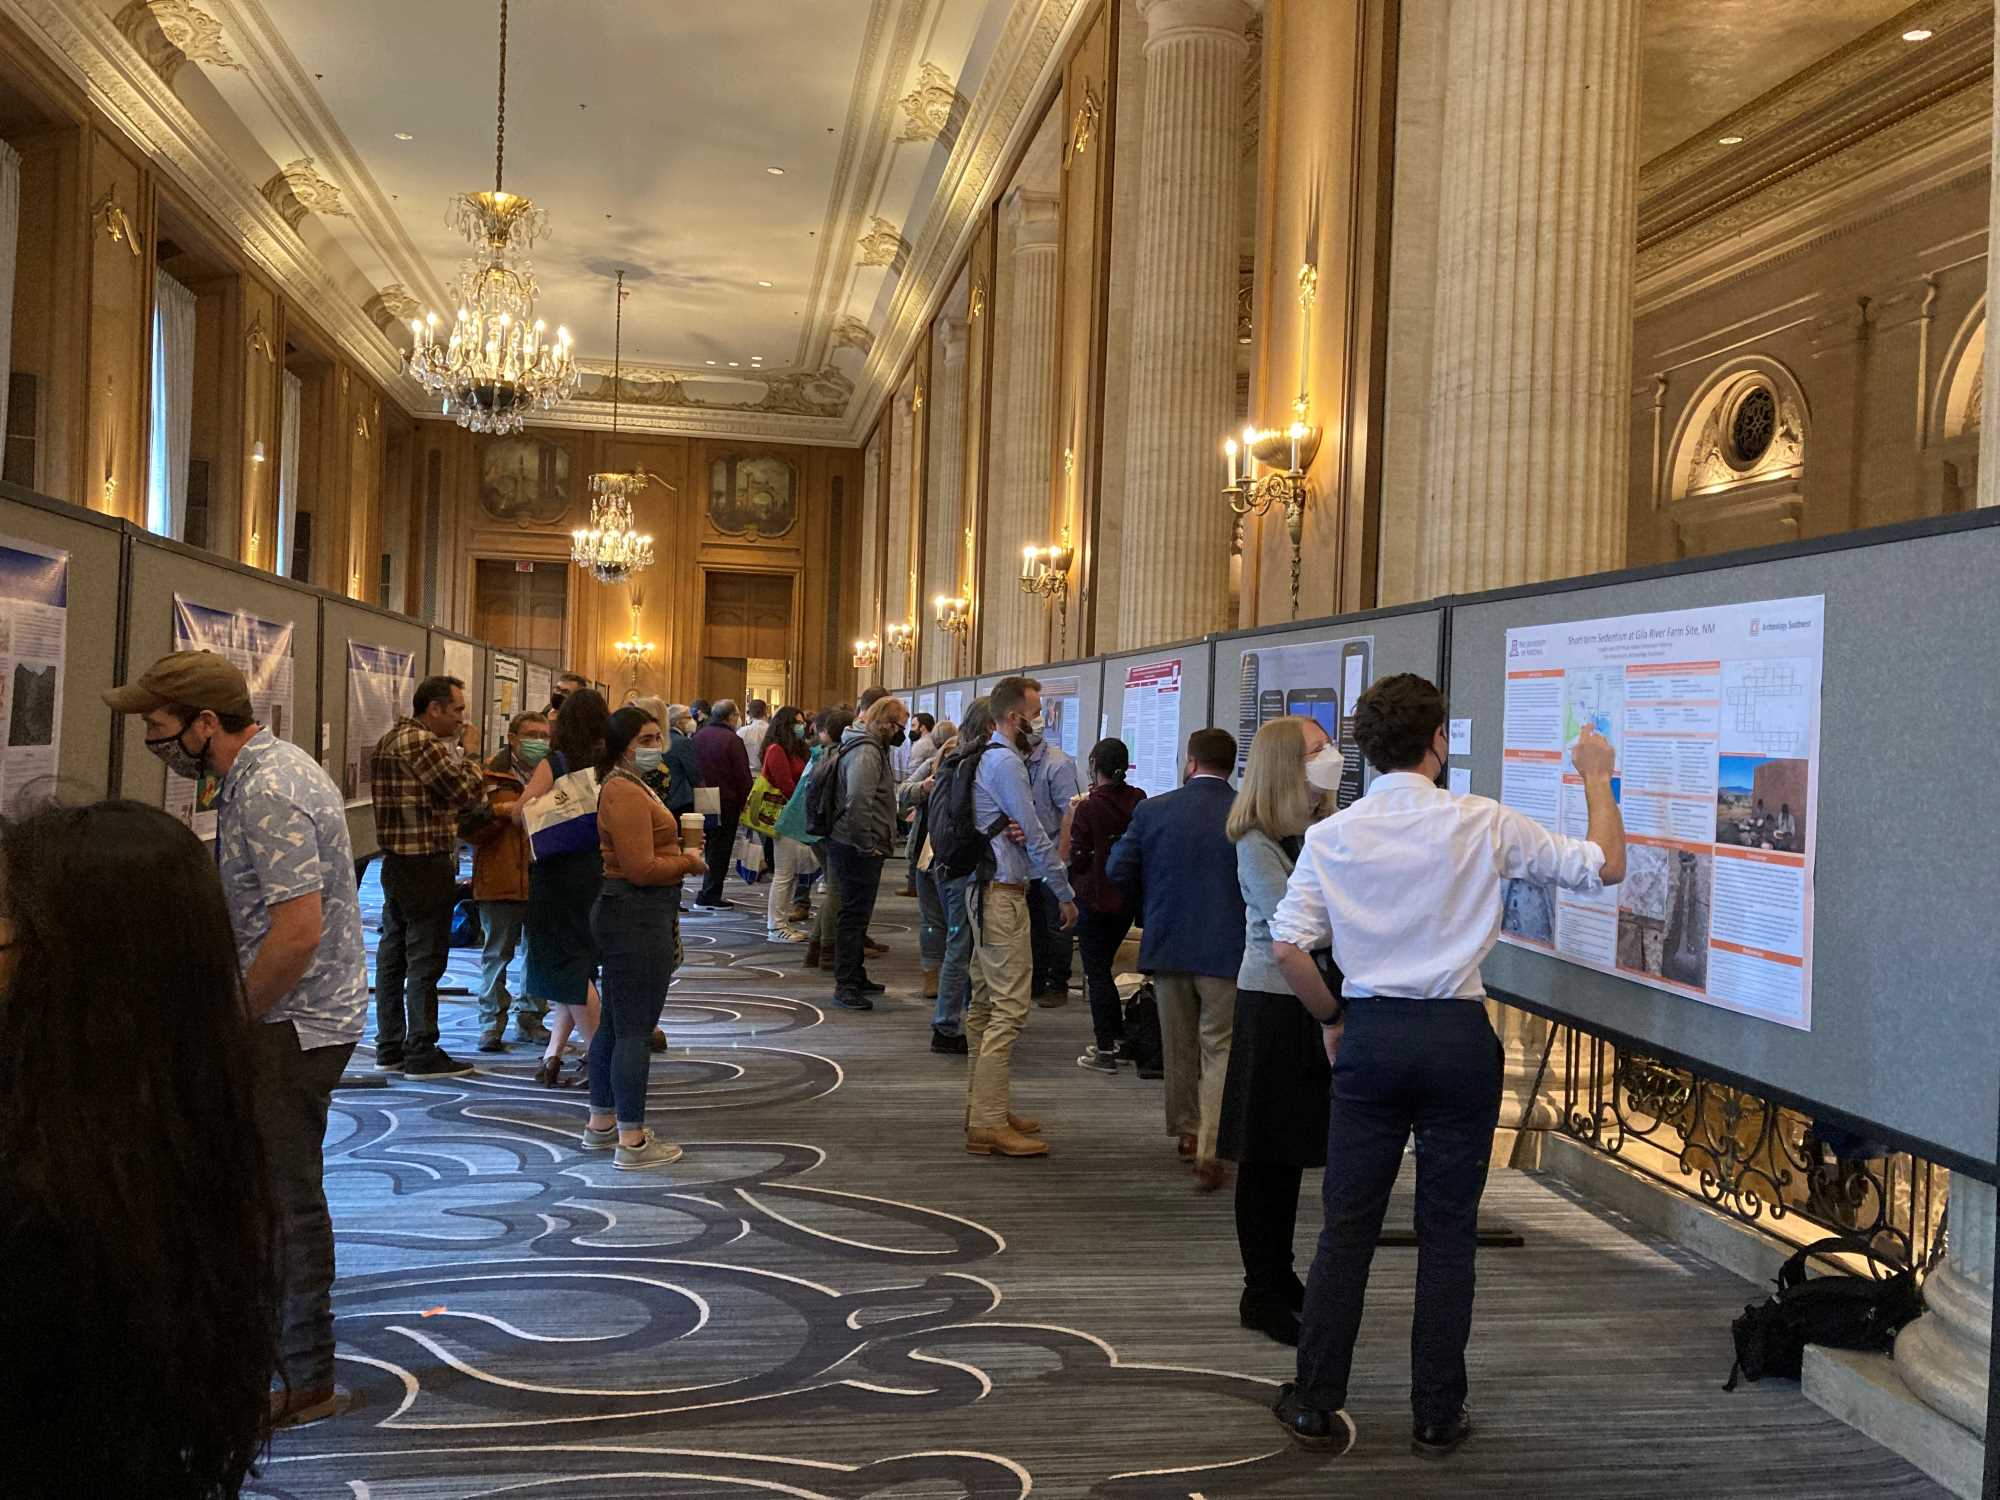 Our SAA poster session with students and colleagues in Chicago last spring.